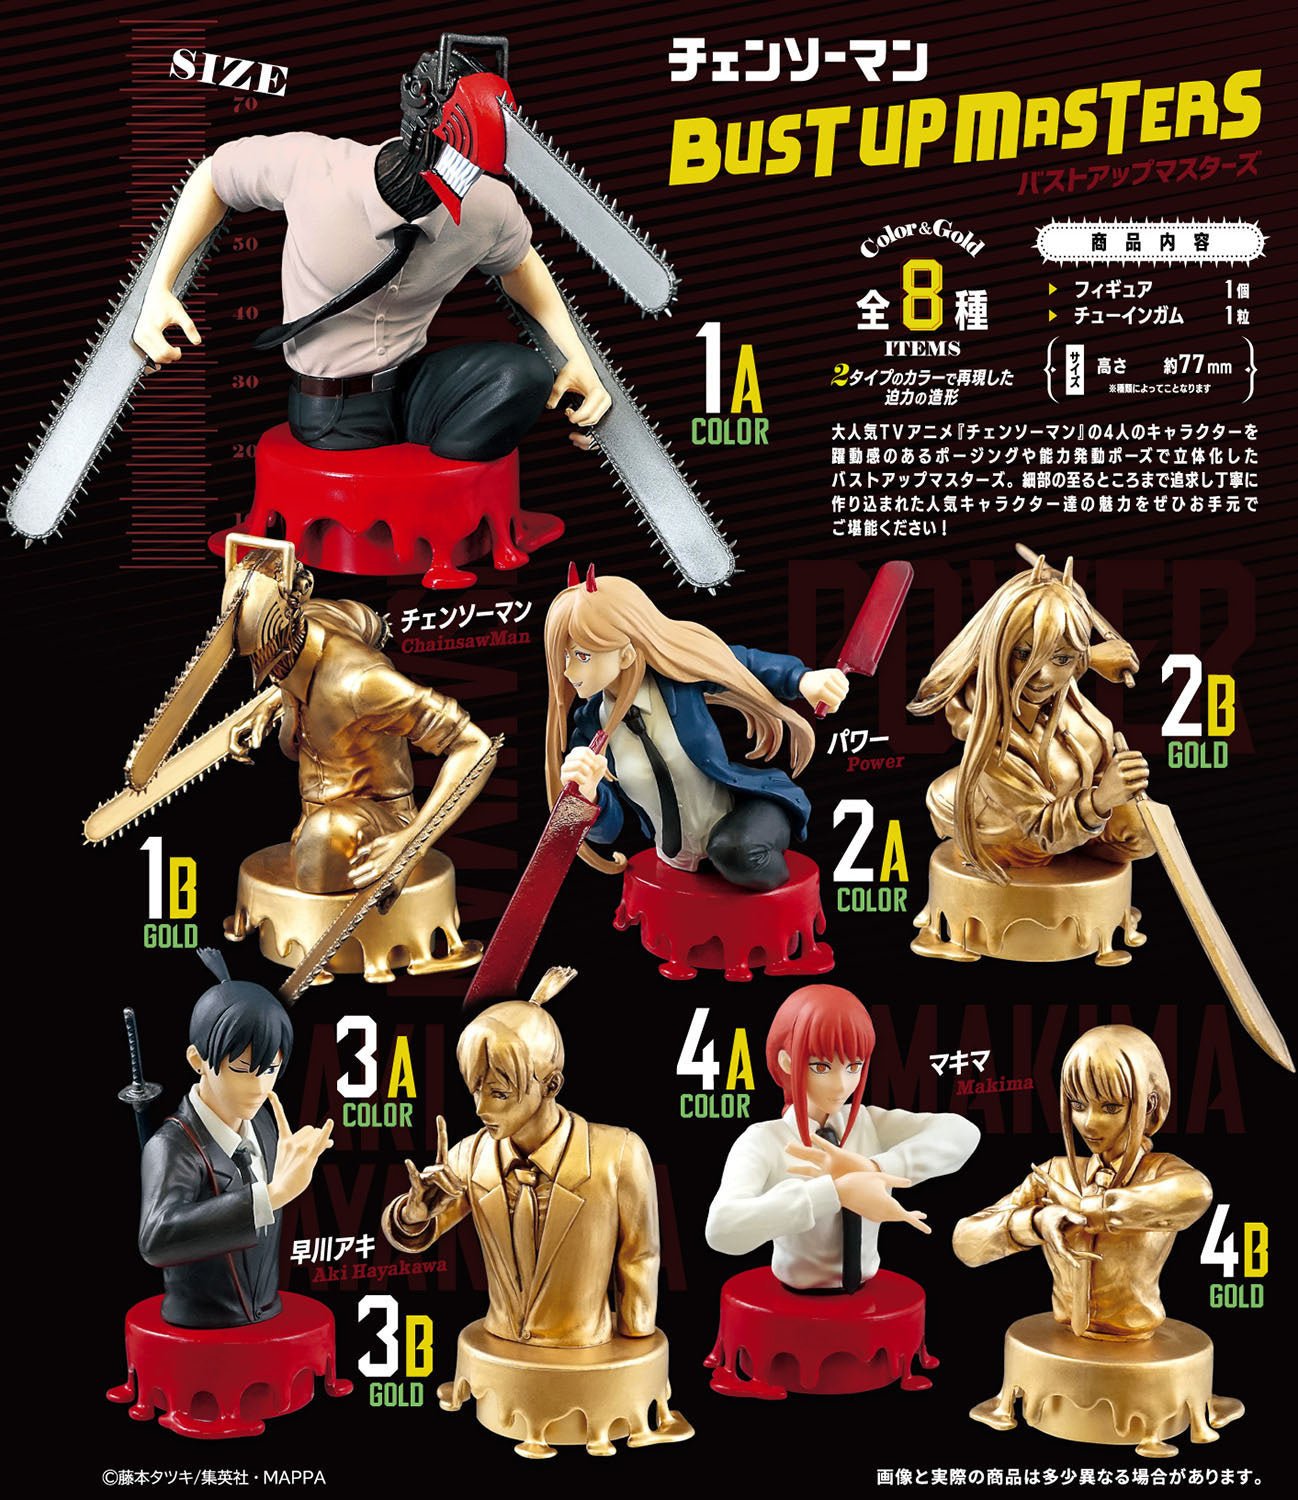 F-Toys - Chainsaw Man Bust Up Masters: 1 Random Pull - Good Game Anime